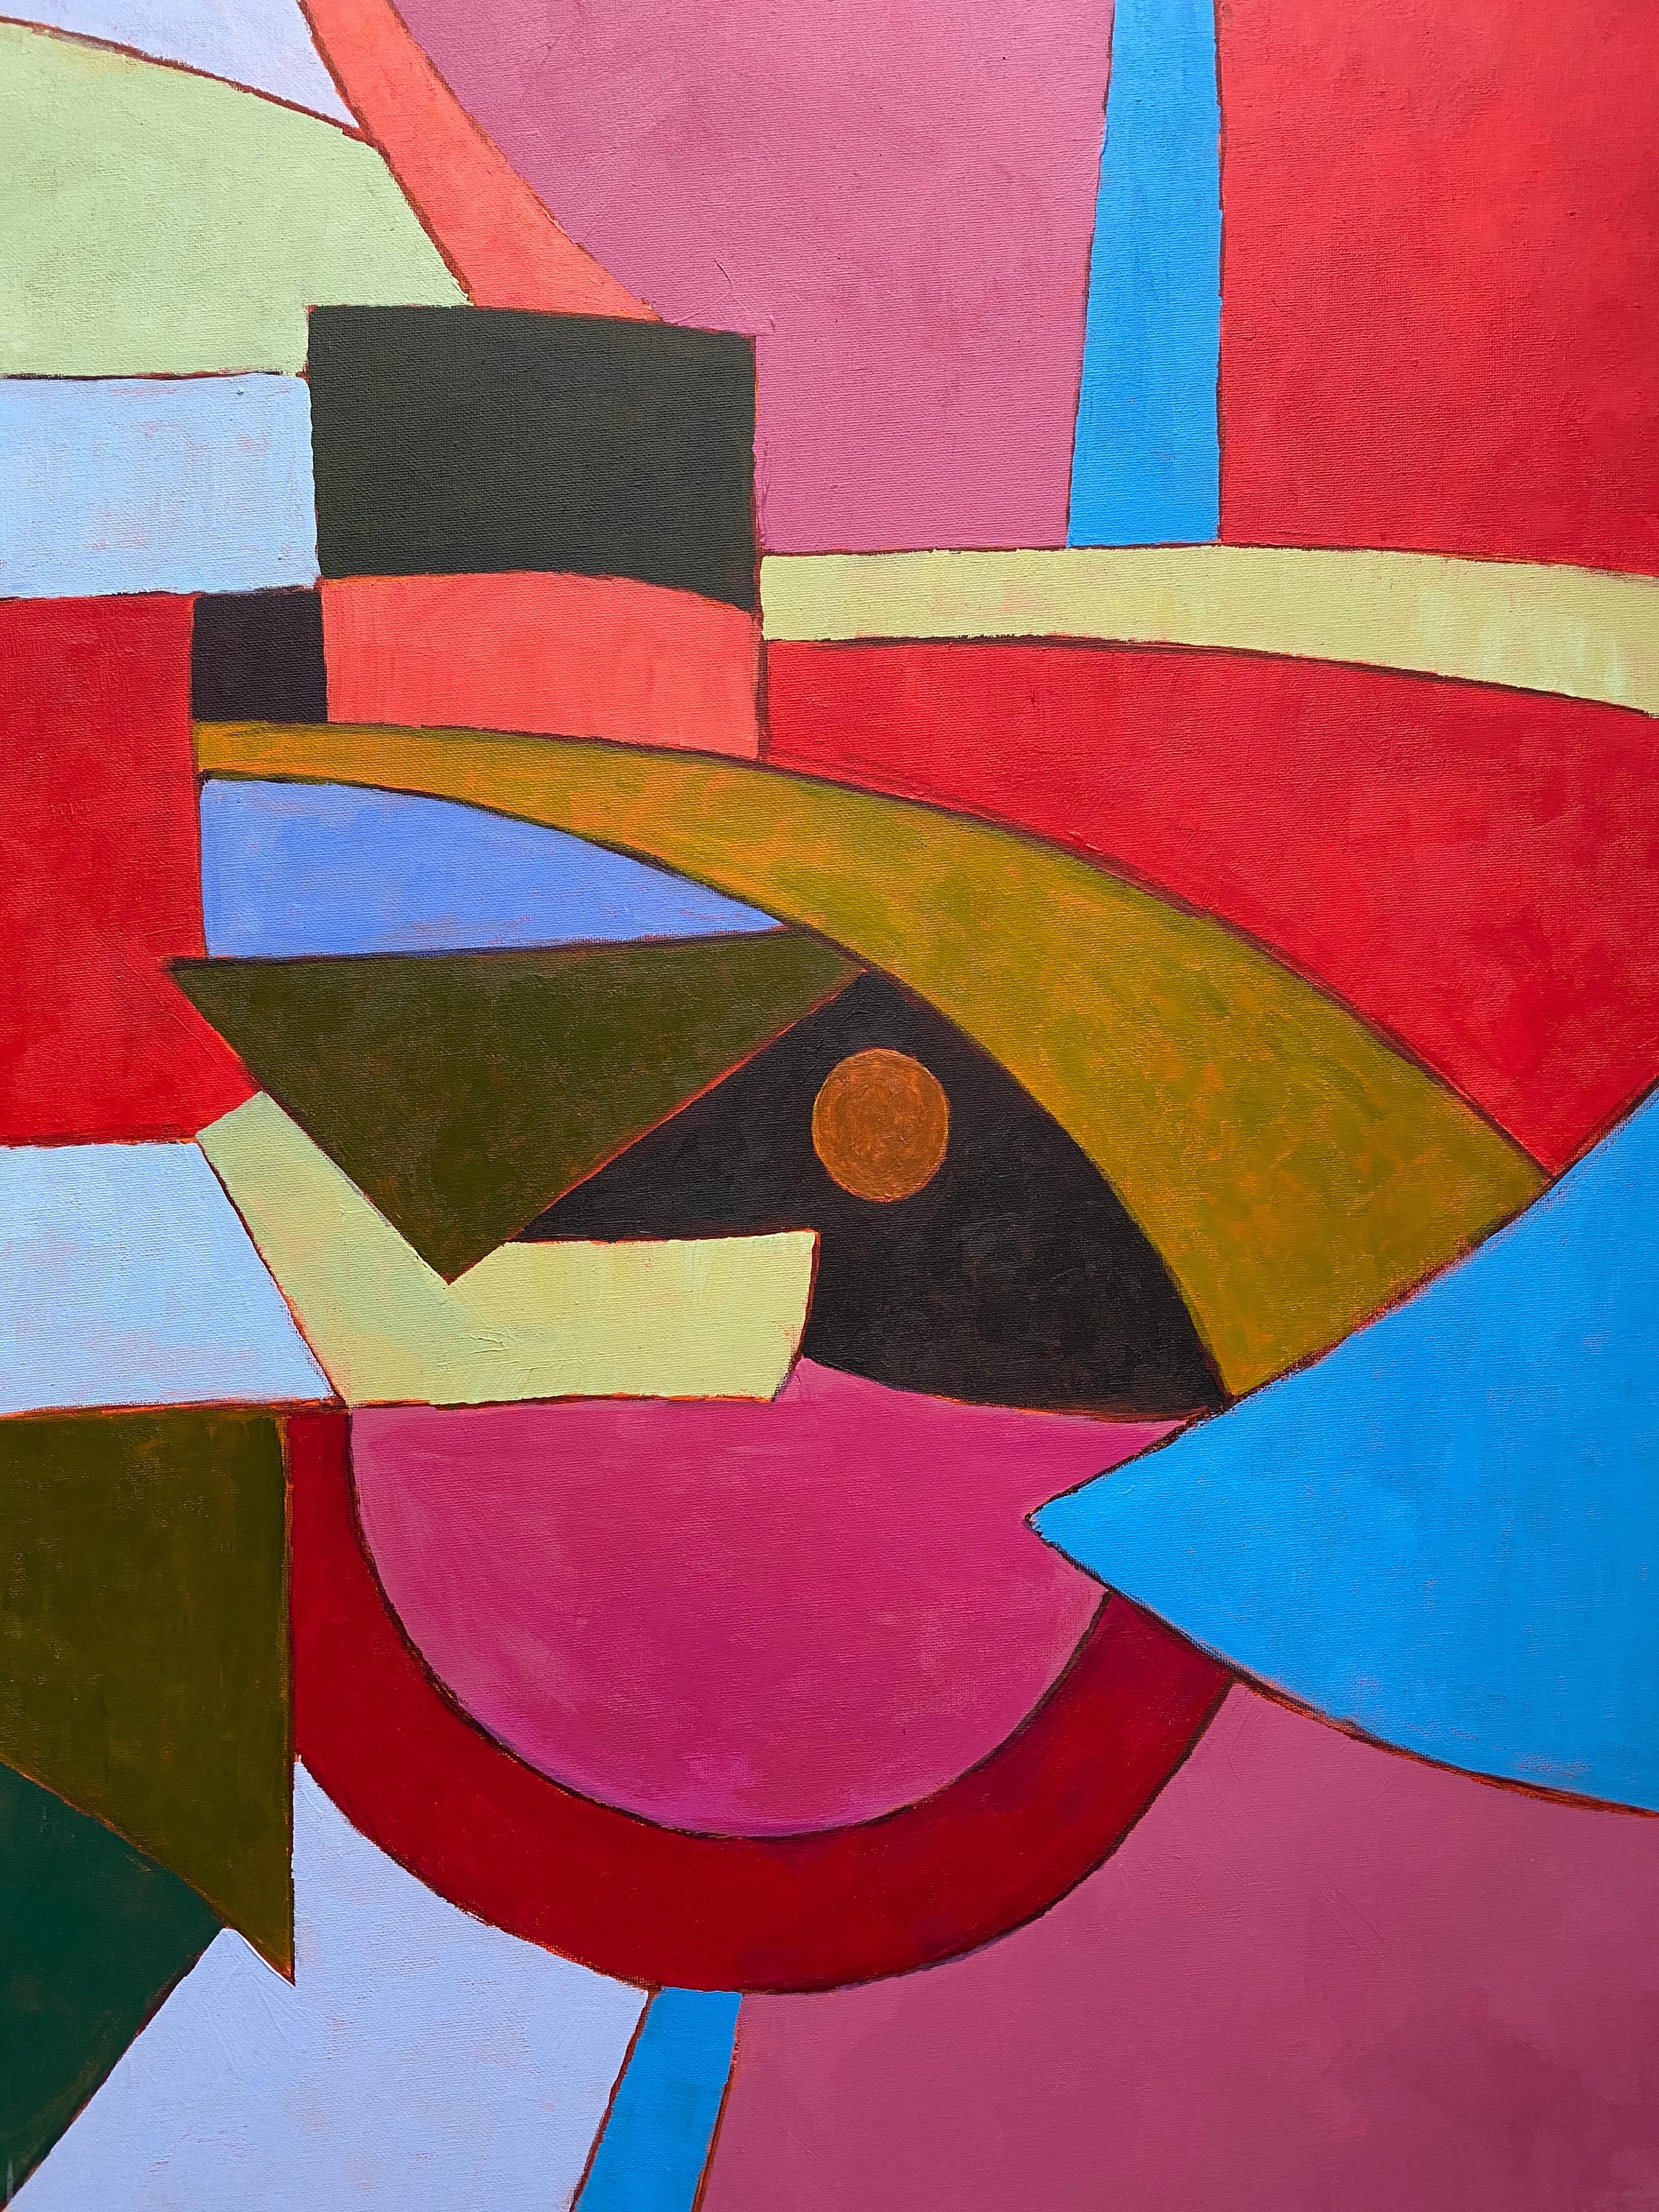 Geometric Abstract Painting by Listed British artist - Mix of Bright Colors For Sale 2